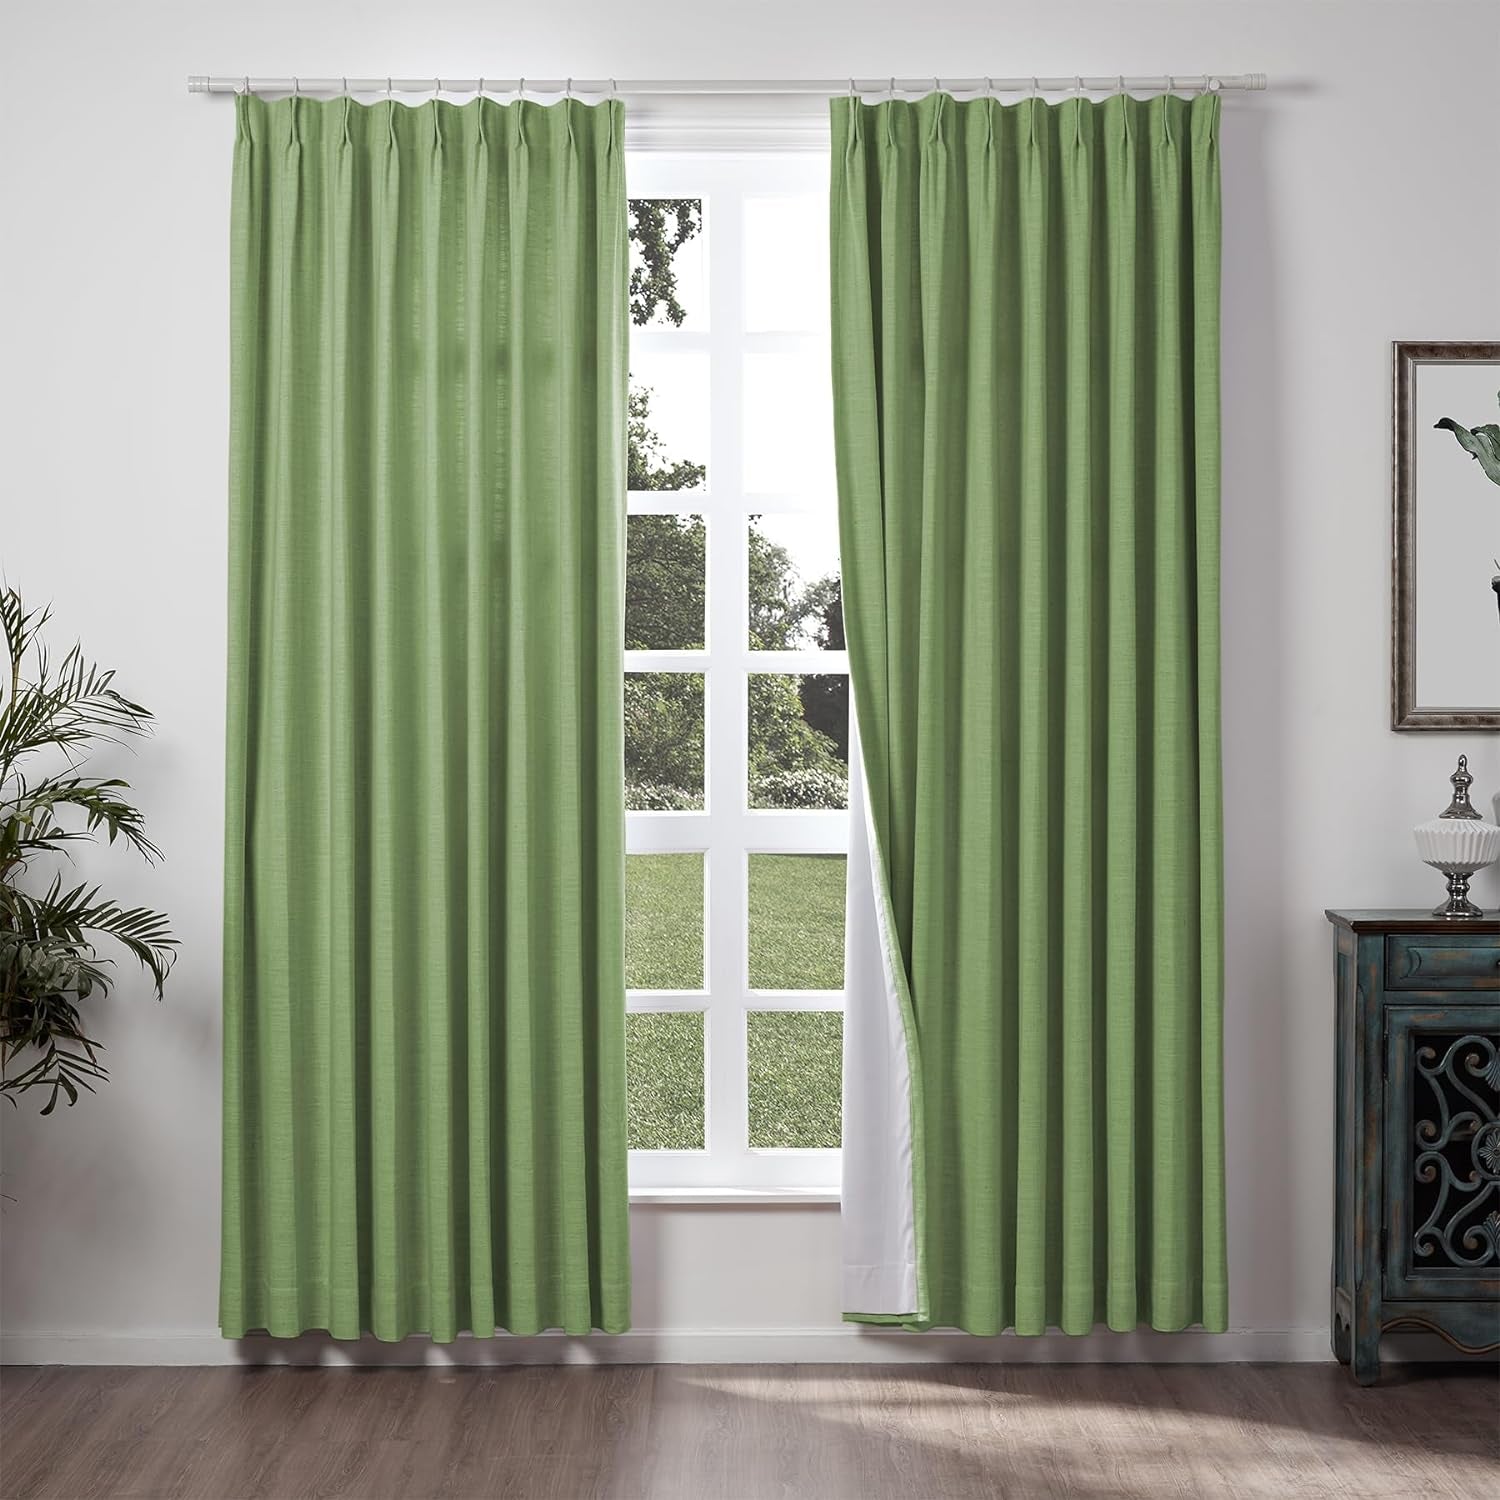 Chadmade 50" W X 63" L Polyester Linen Drape with Blackout Lining Pinch Pleat Curtain for Sliding Door Patio Door Living Room Bedroom, (1 Panel) Sand Beige Tallis Collection  ChadMade Green (30) 72Wx96L 